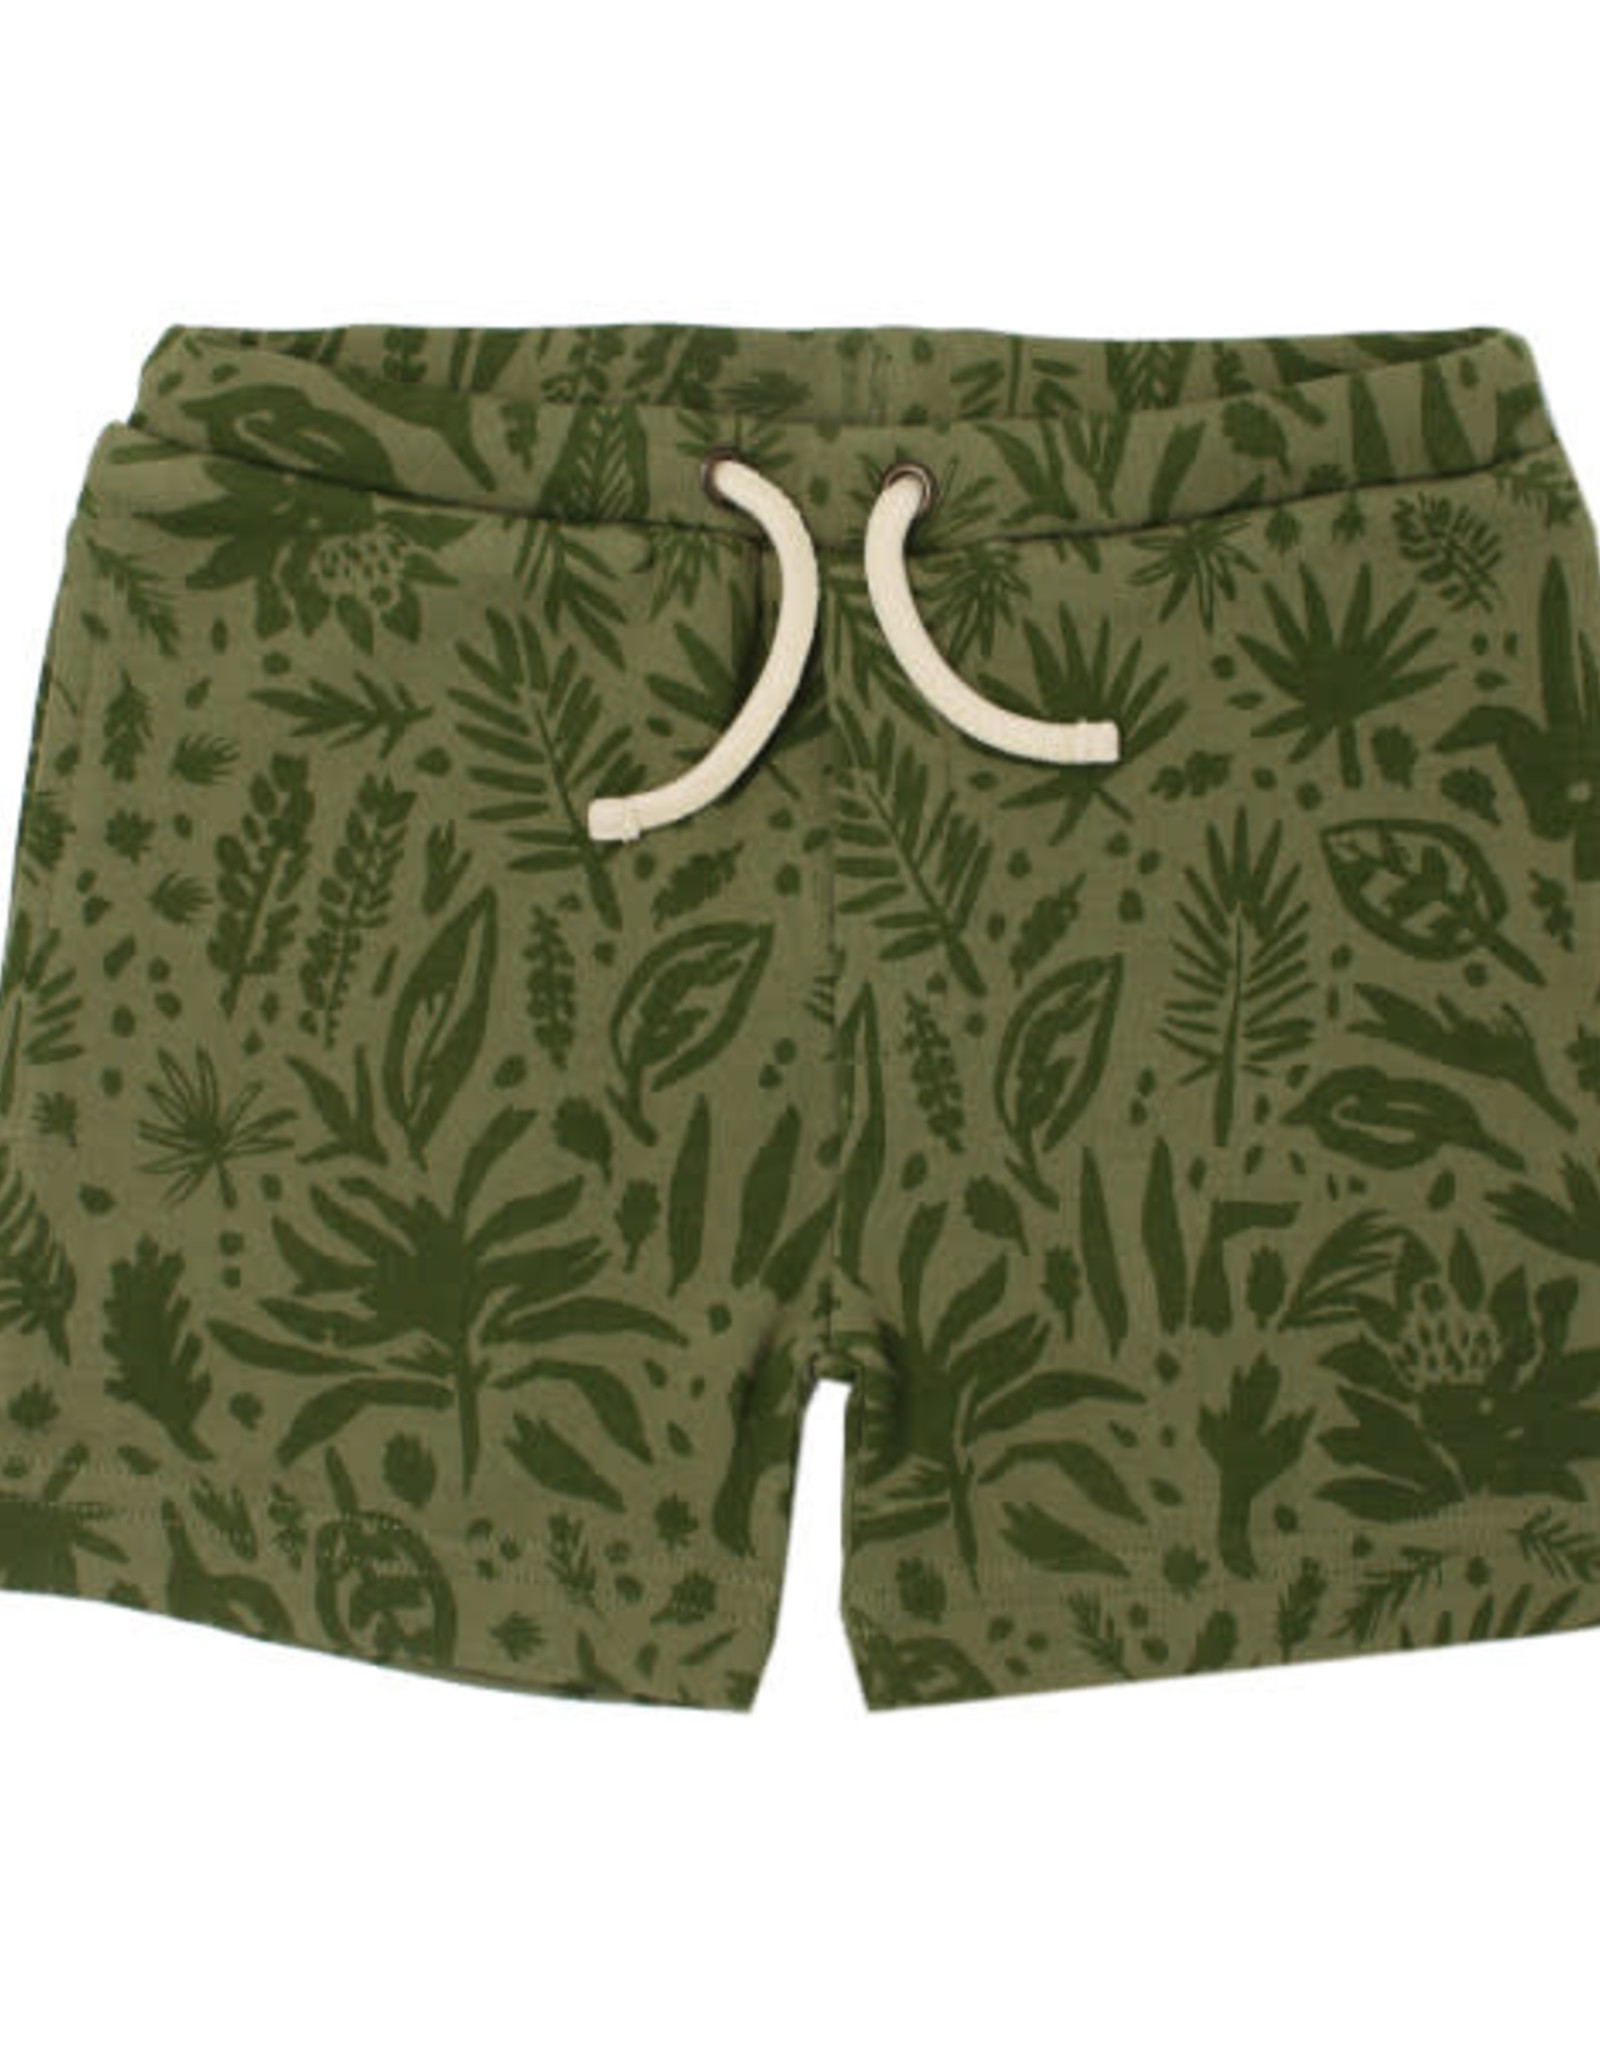 L'oved Baby Kids' Shorts Get Clover It!